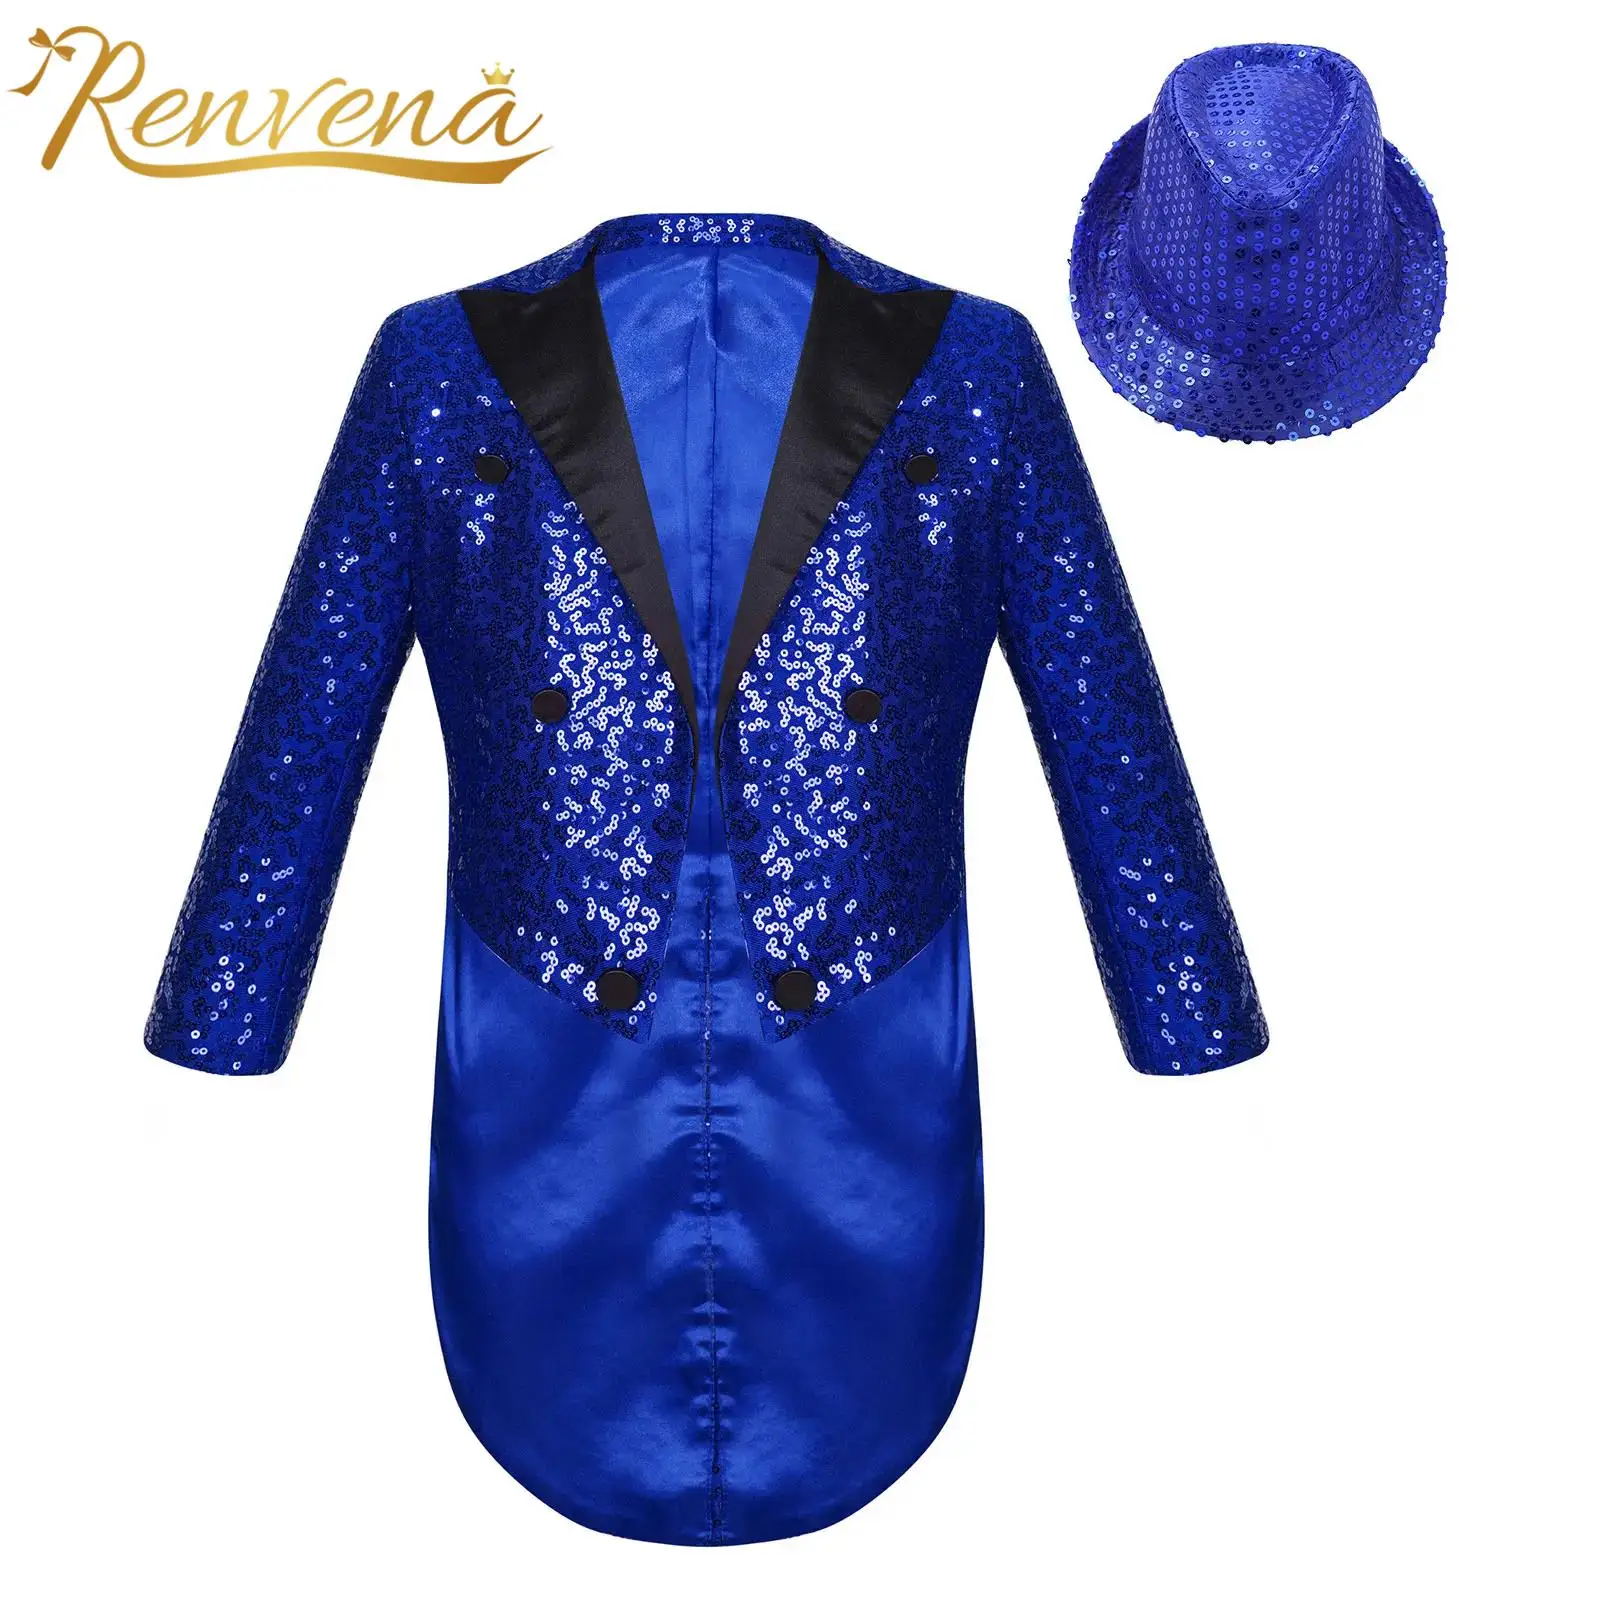 

Kids Boys Blazer Suits Jacket Magic Show Jazz Dance Costumes Performance Outfit Long Sleeve Sequin Tailcoat with Sequined Hat